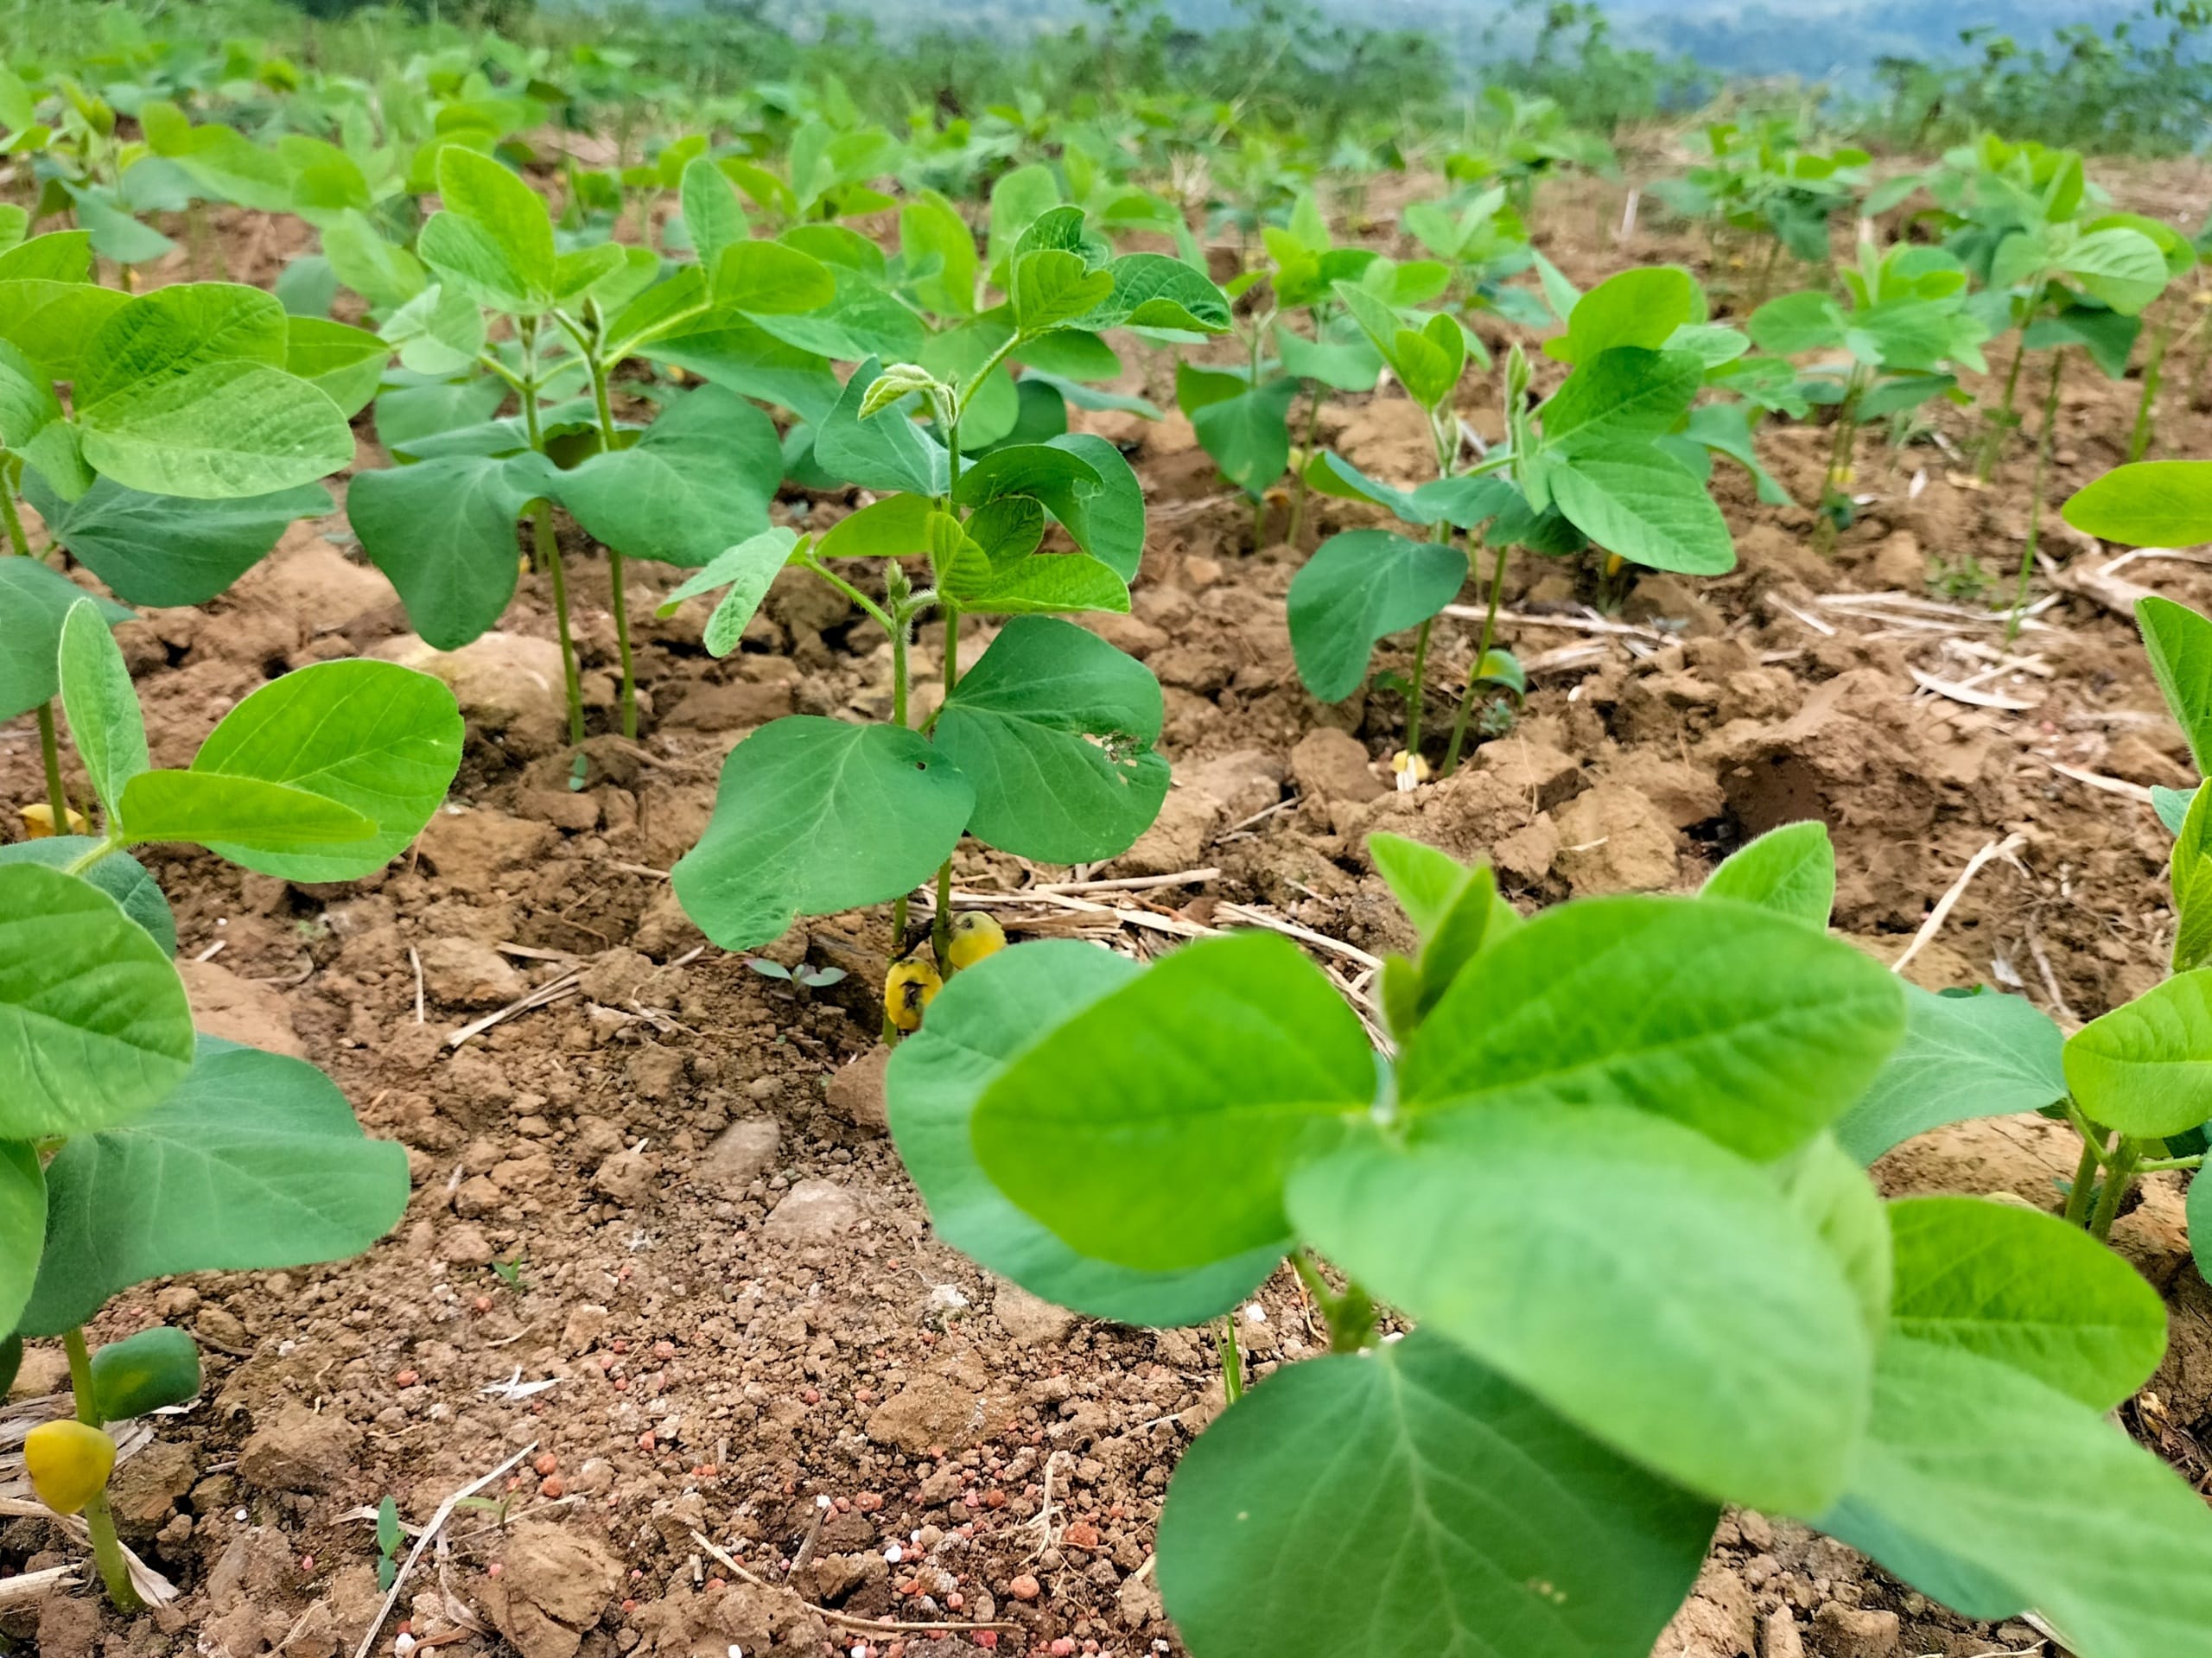 Closeup view of a Soybean plant.